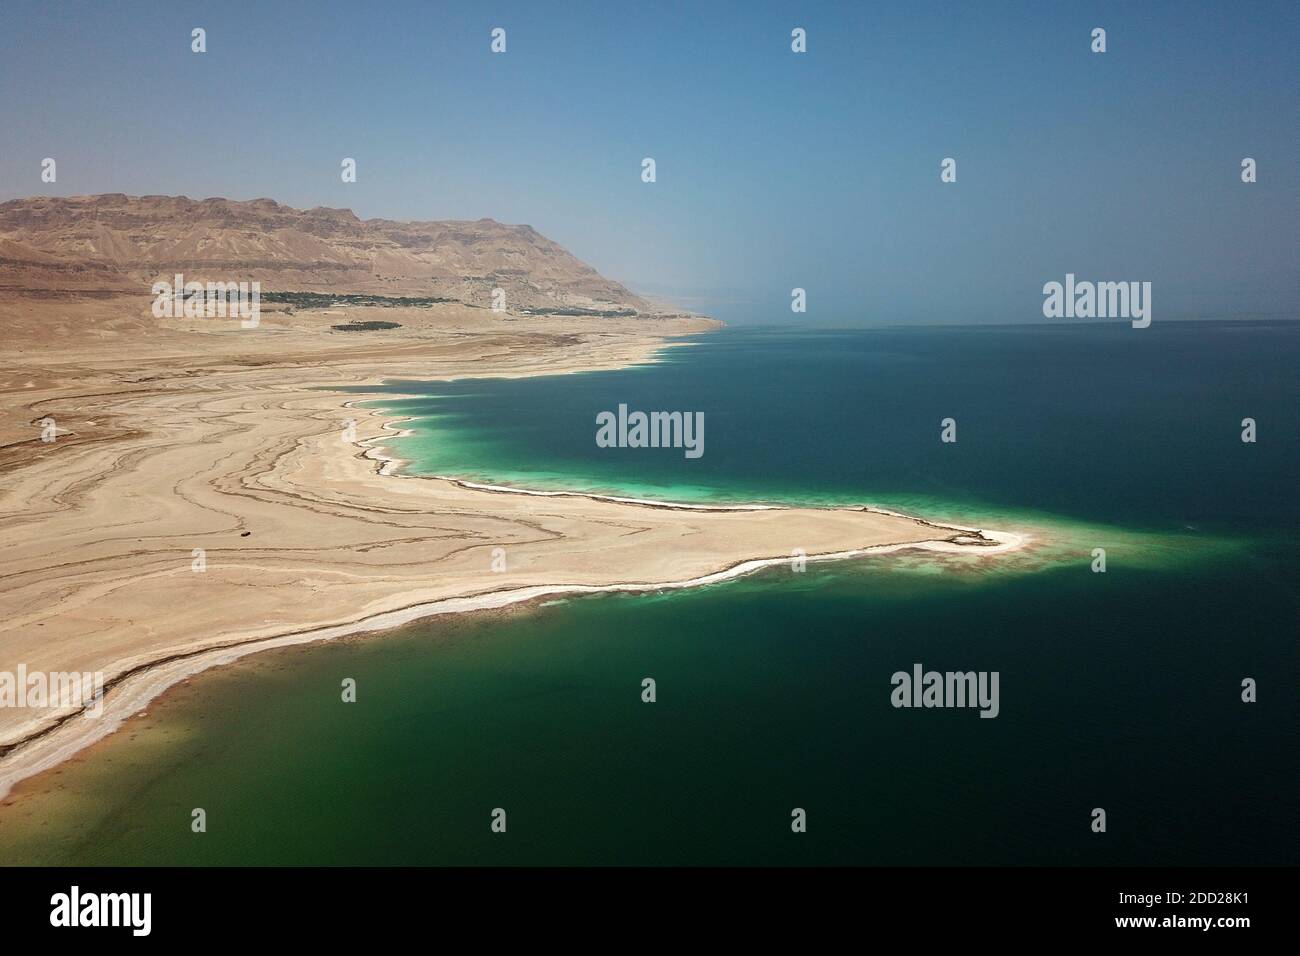 Aerial view of the west shores of the Dead Sea in the vicinity of Ein Gedi, Israel. Stock Photo